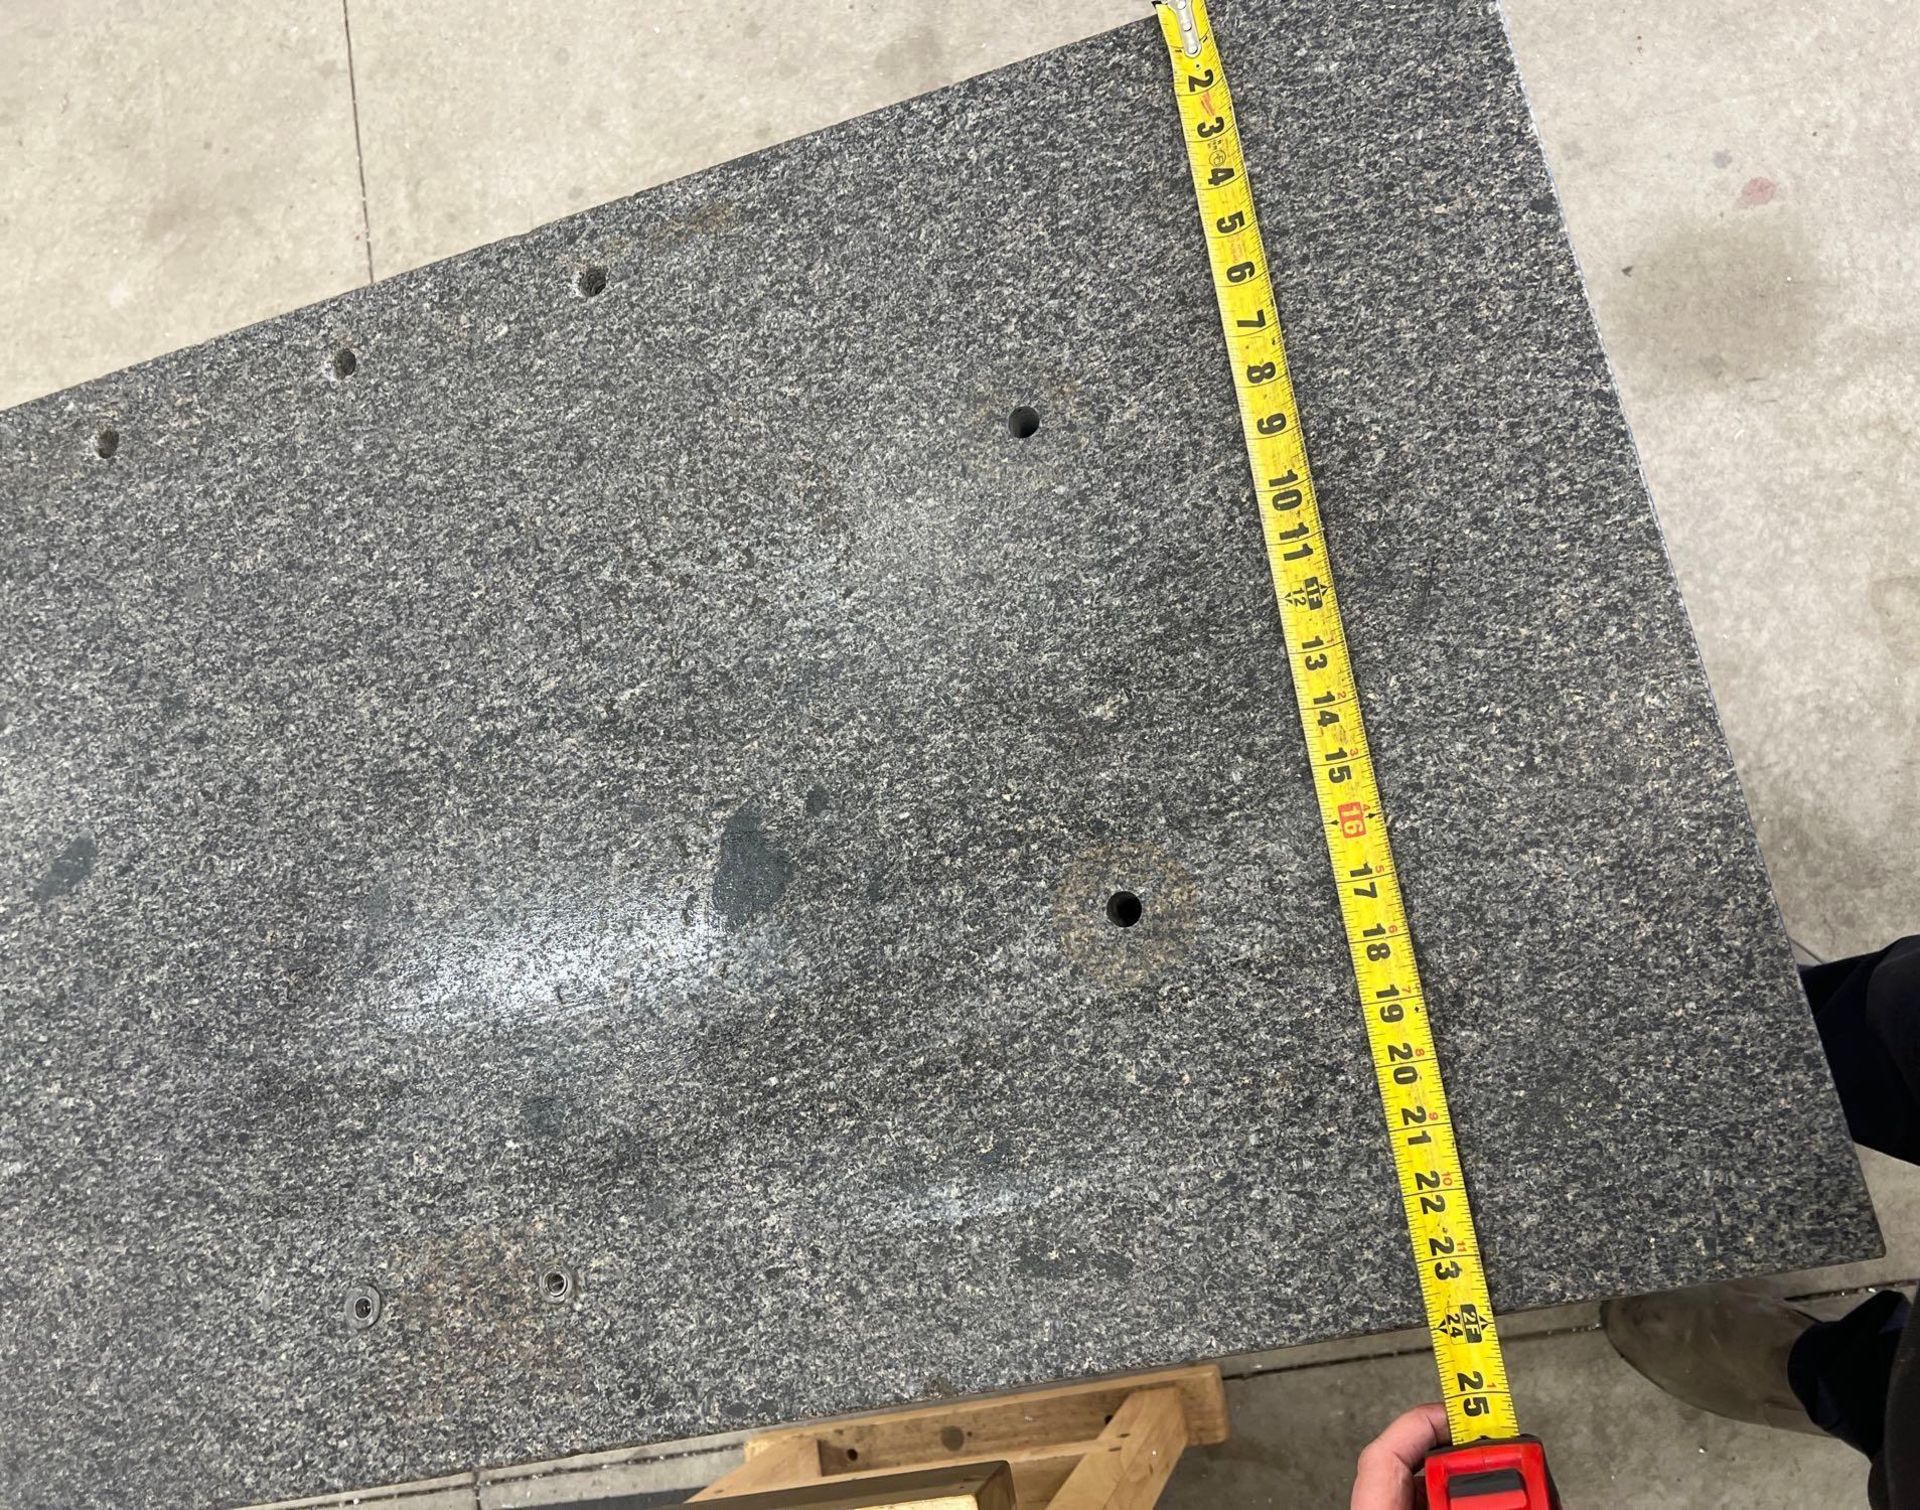 36"x24"x6" Granite Inspection Plate w/Stand - Image 5 of 8